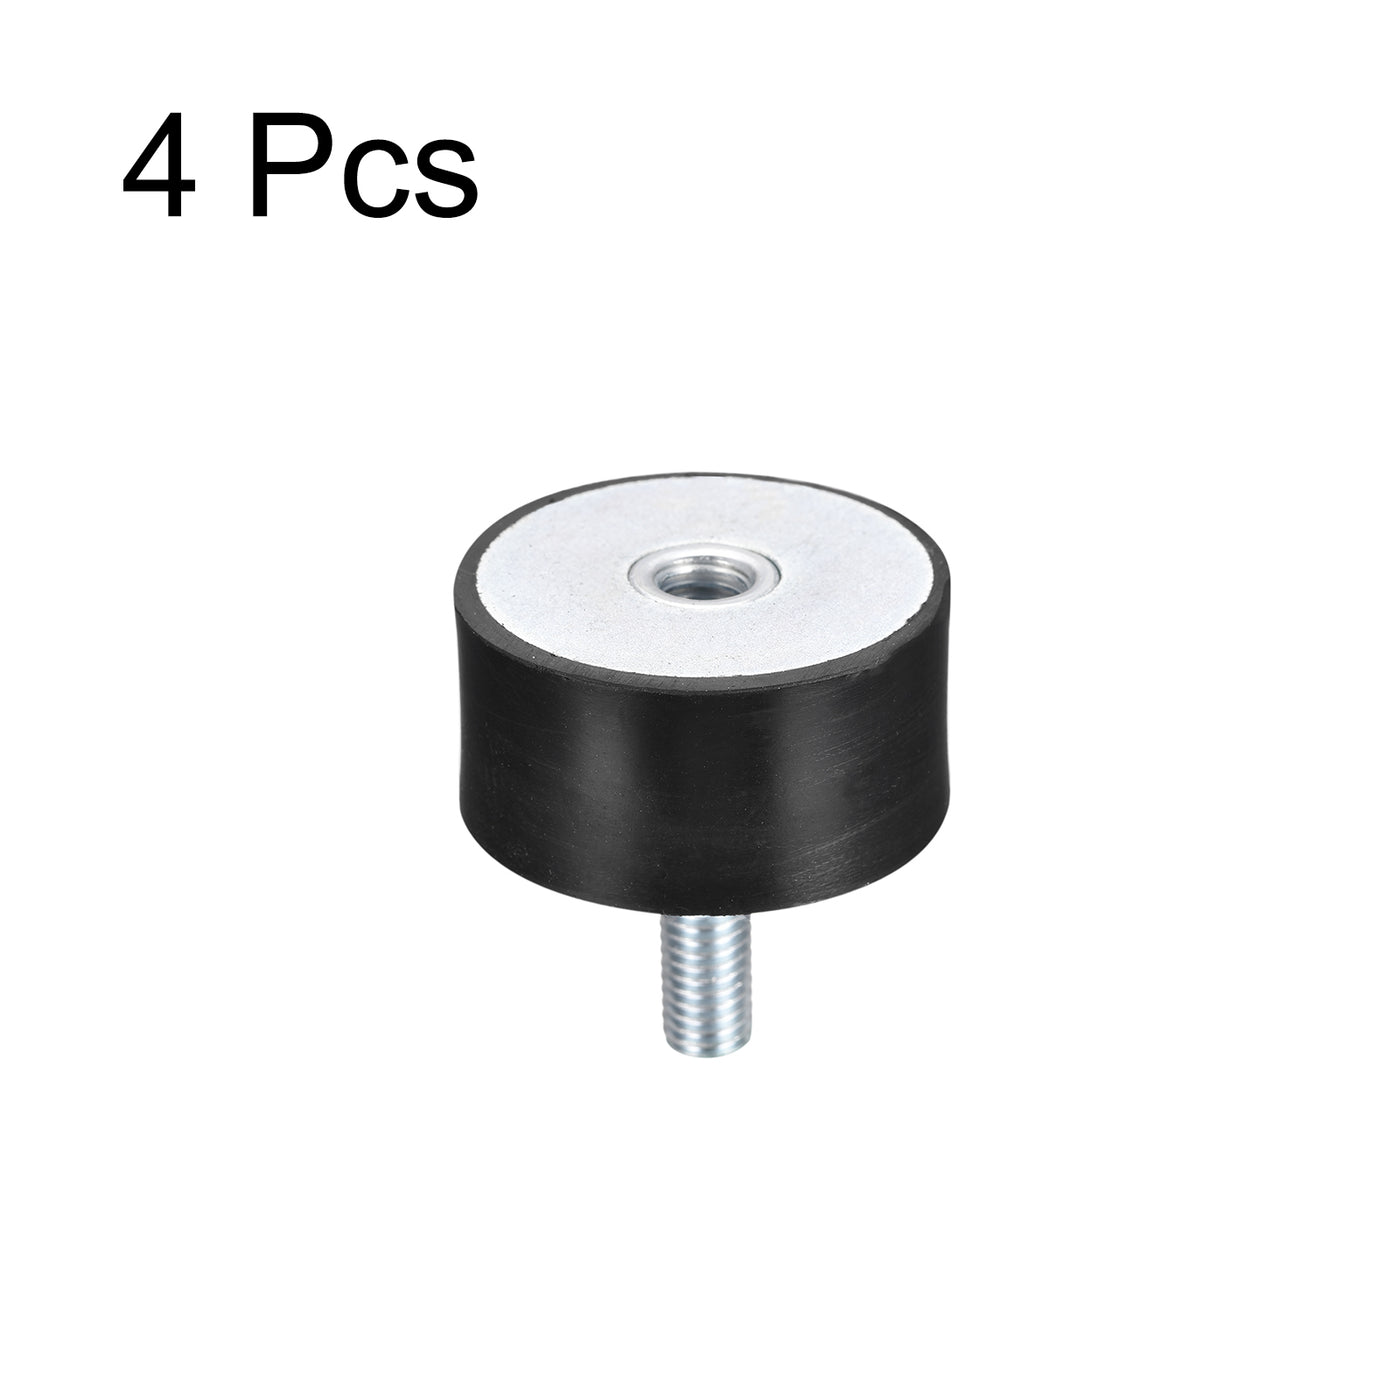 uxcell Uxcell Rubber Mount 4pcs M8 Male/Female Vibration Isolator Shock Absorber, D40mmxH20mm